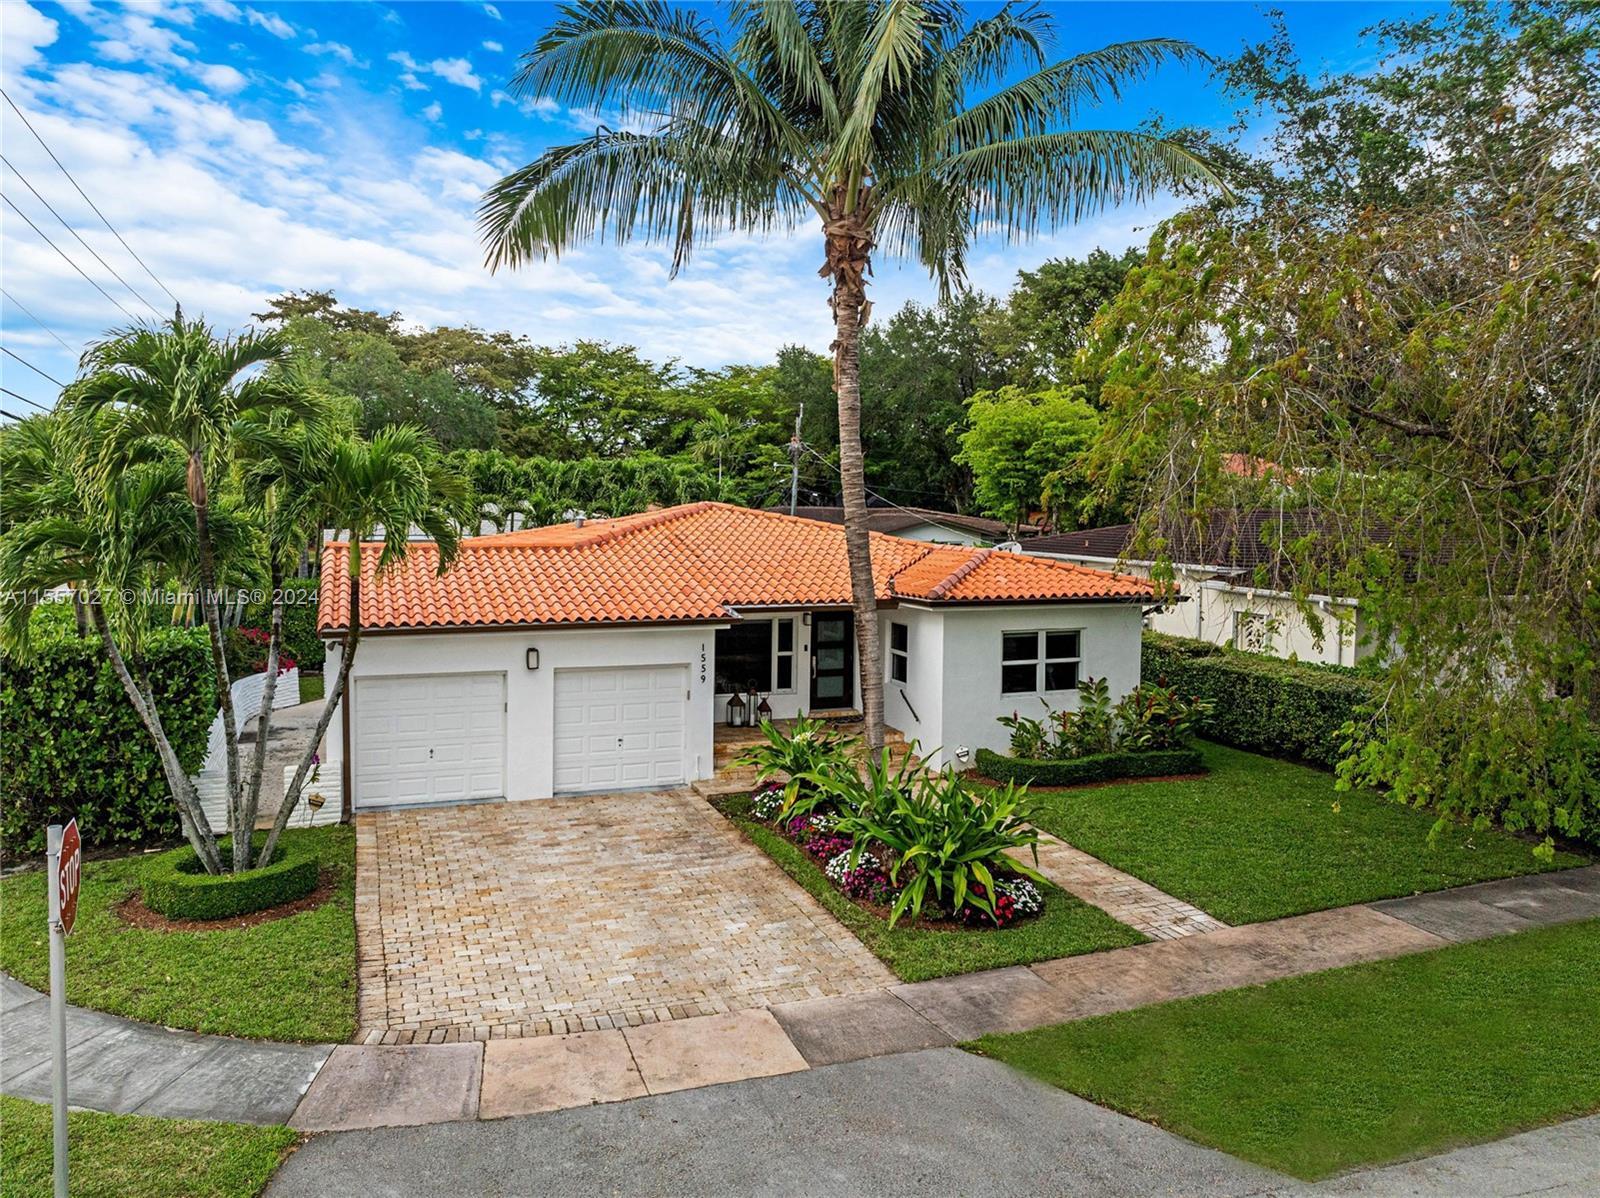 Photo of 1559 Trevino Ave in Coral Gables, FL